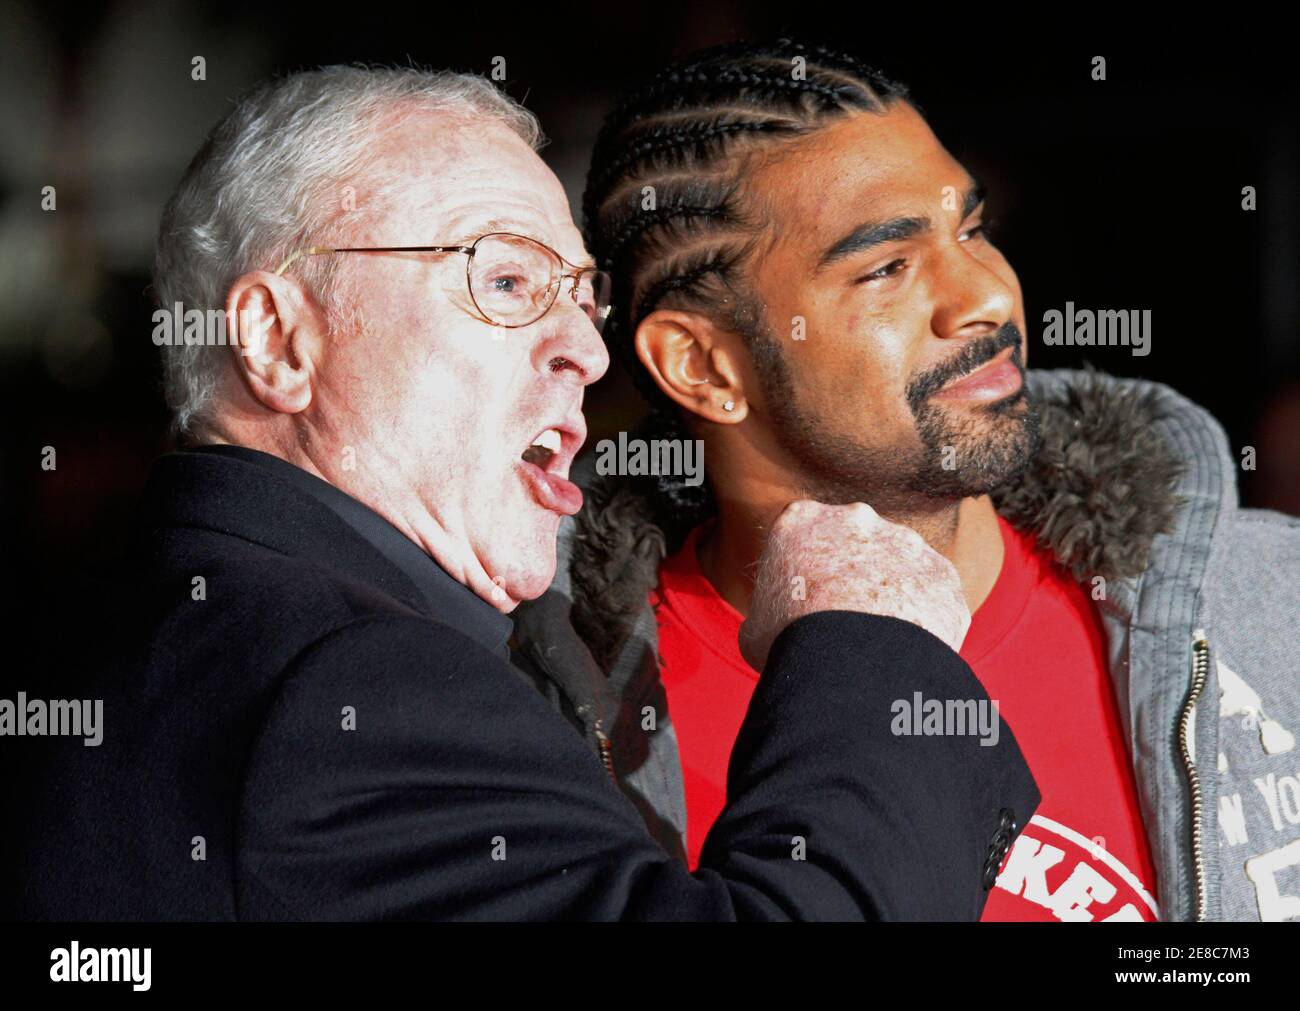 titel teenagere Standard British actor Michael Caine (L) jokes with new WBA heavyweight boxing world  champion David Haye as they arrive for the European premiere of the movie  "Harry Brown" in London, November 10, 2009.